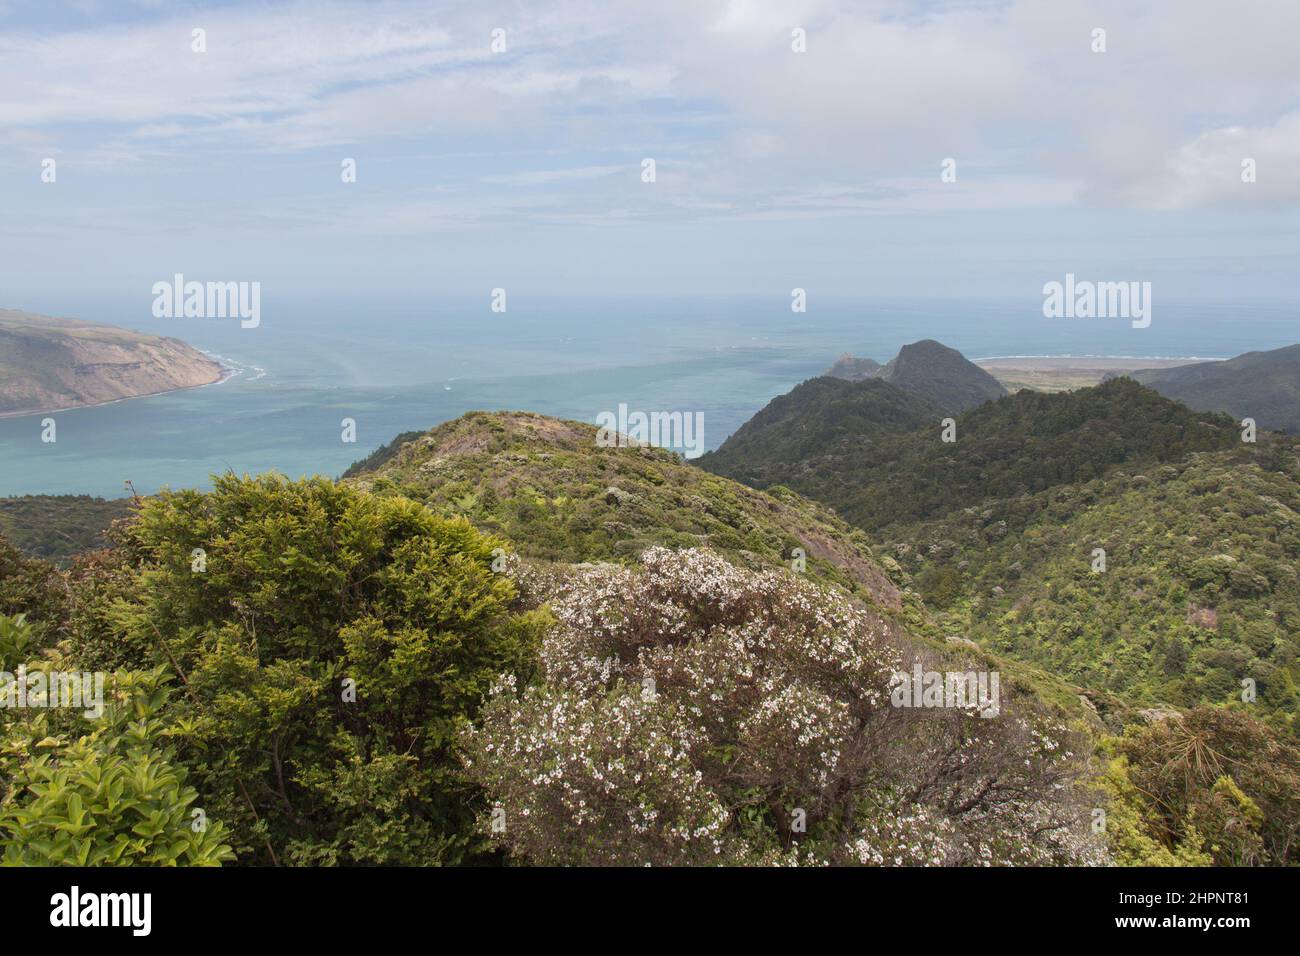 The view of picturesque landscape from mount Donald McLean lookout, Waitakere Ranges Regional Park, New Zealand. Stock Photo